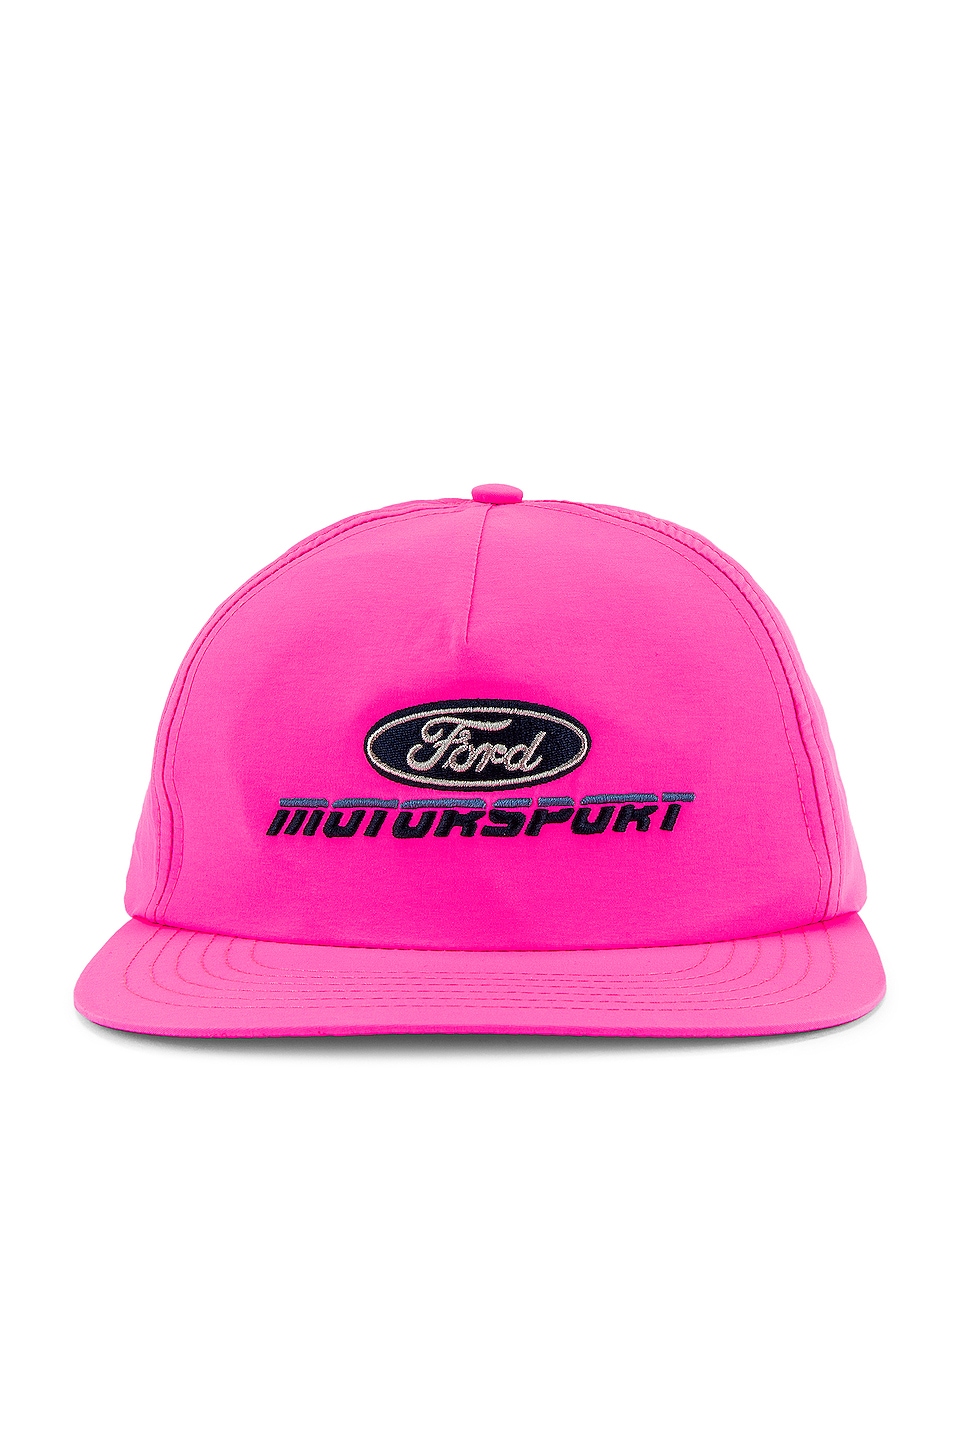 ROLLA'S Ford Parachute Cap 80s Pink